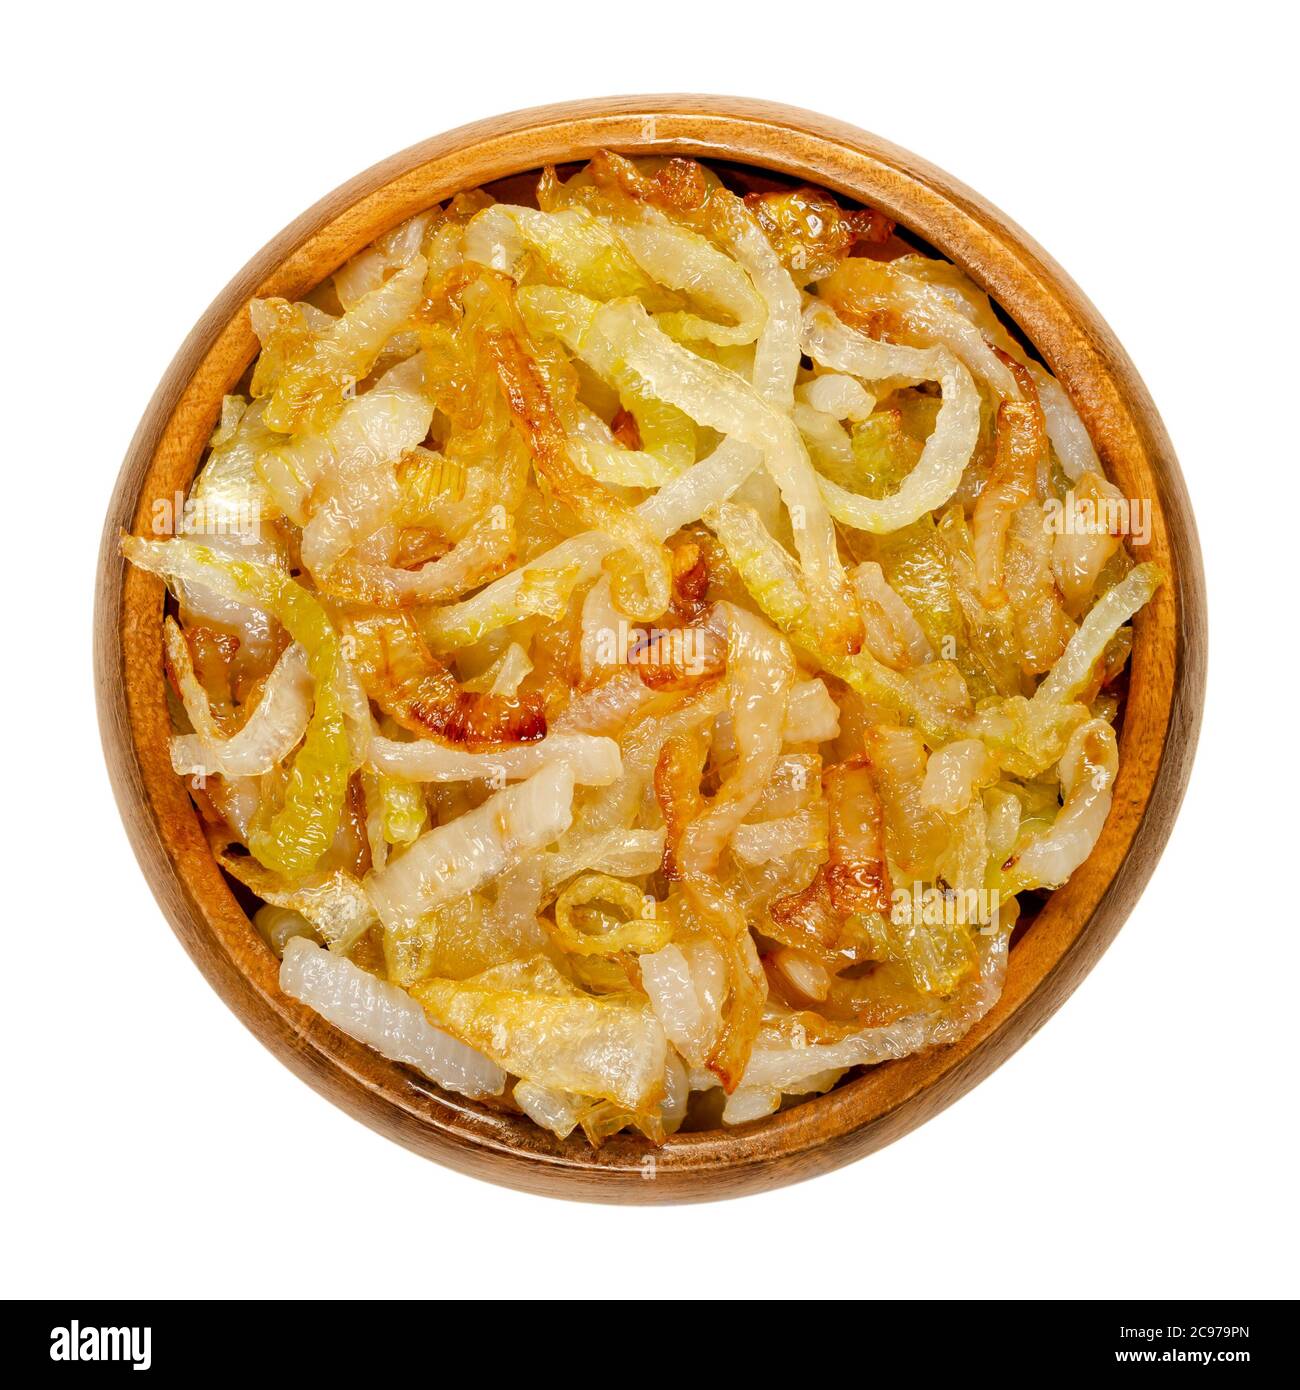 Onions, golden brown roasted, in a wooden bowl. Sliced white onions, fried in oil to get a nice color and fully aroma. Allium cepa. Closeup from above Stock Photo